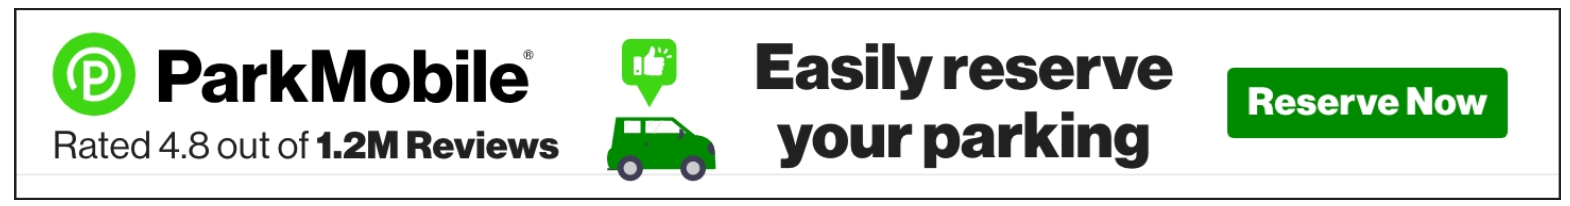 Reserve parking with ParkMobile